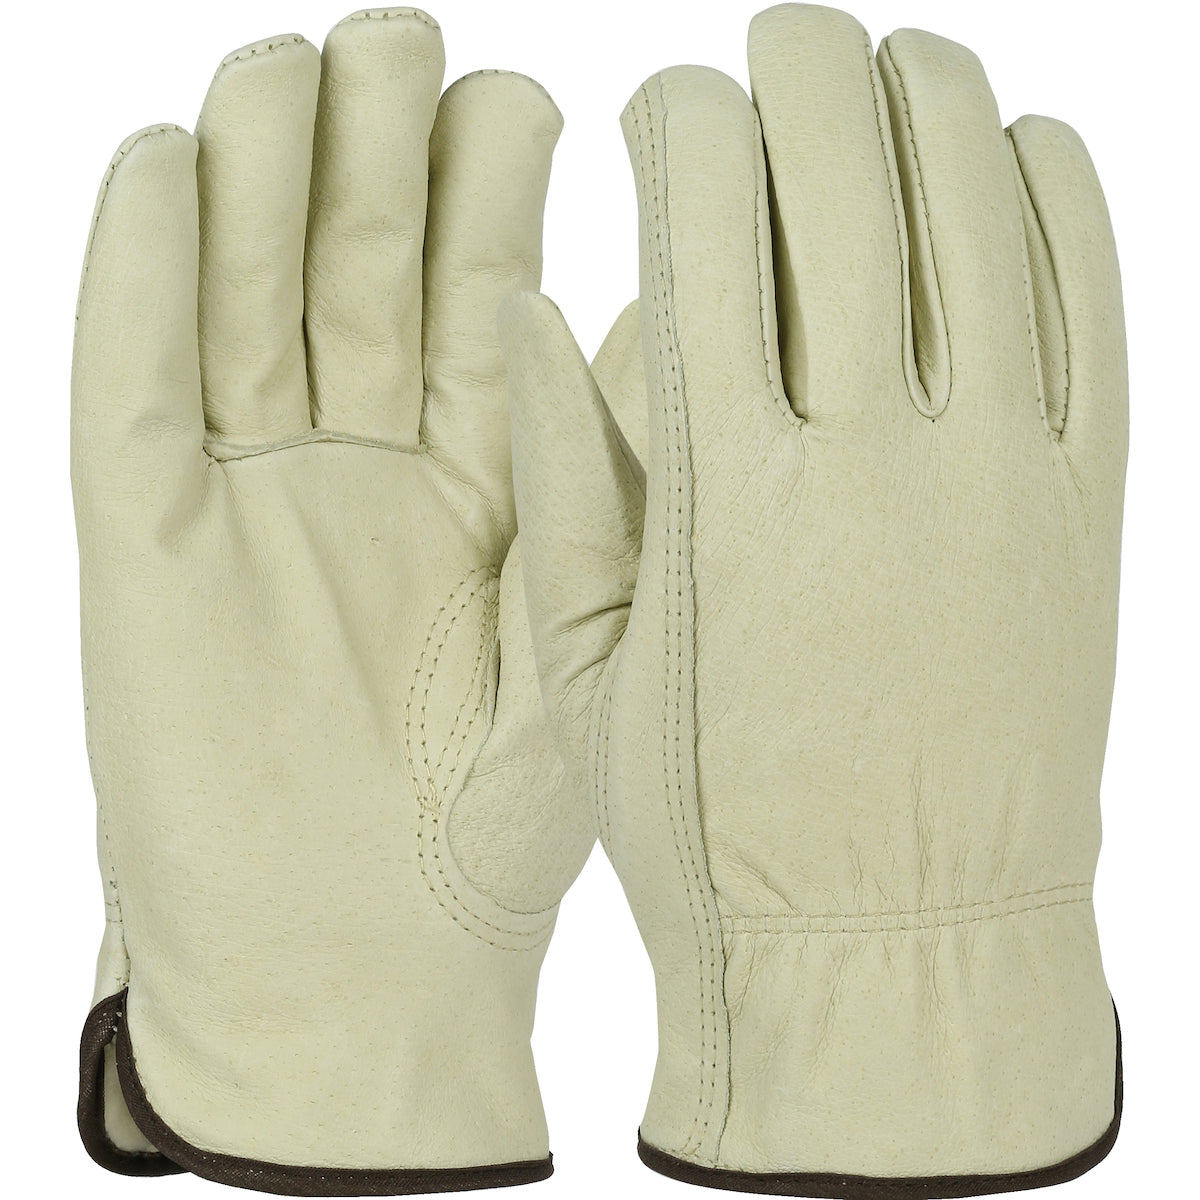 Top Grain Pigskin Leather Drivers Glove with Natural Thermal Lining